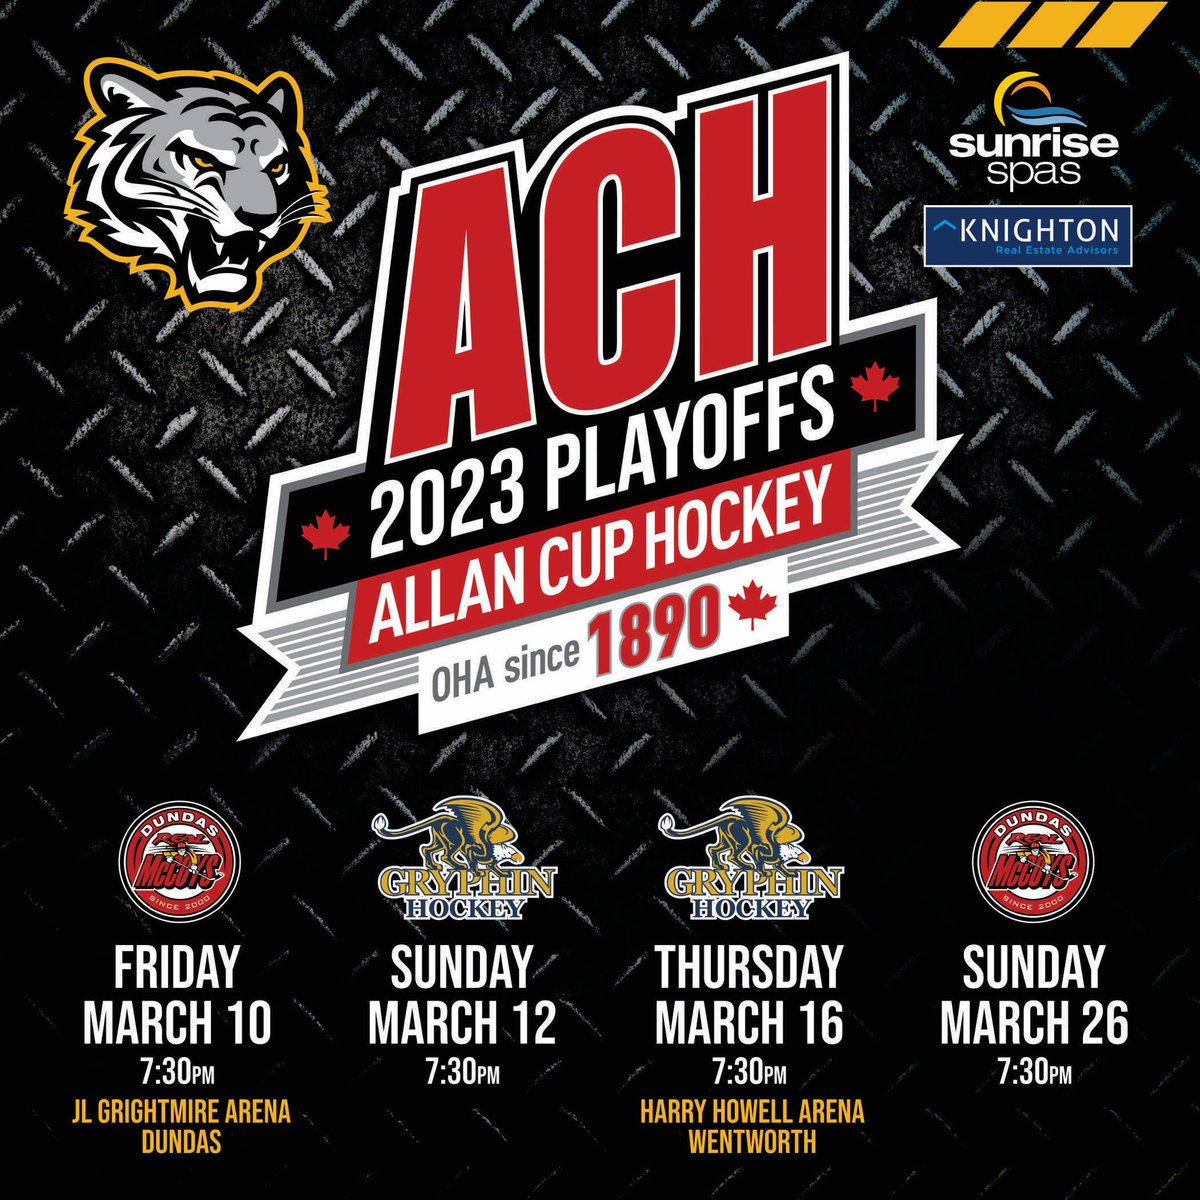 Here we go! Hope to see you at the rink to support the boys! #playoffs #allancup #roundrobin